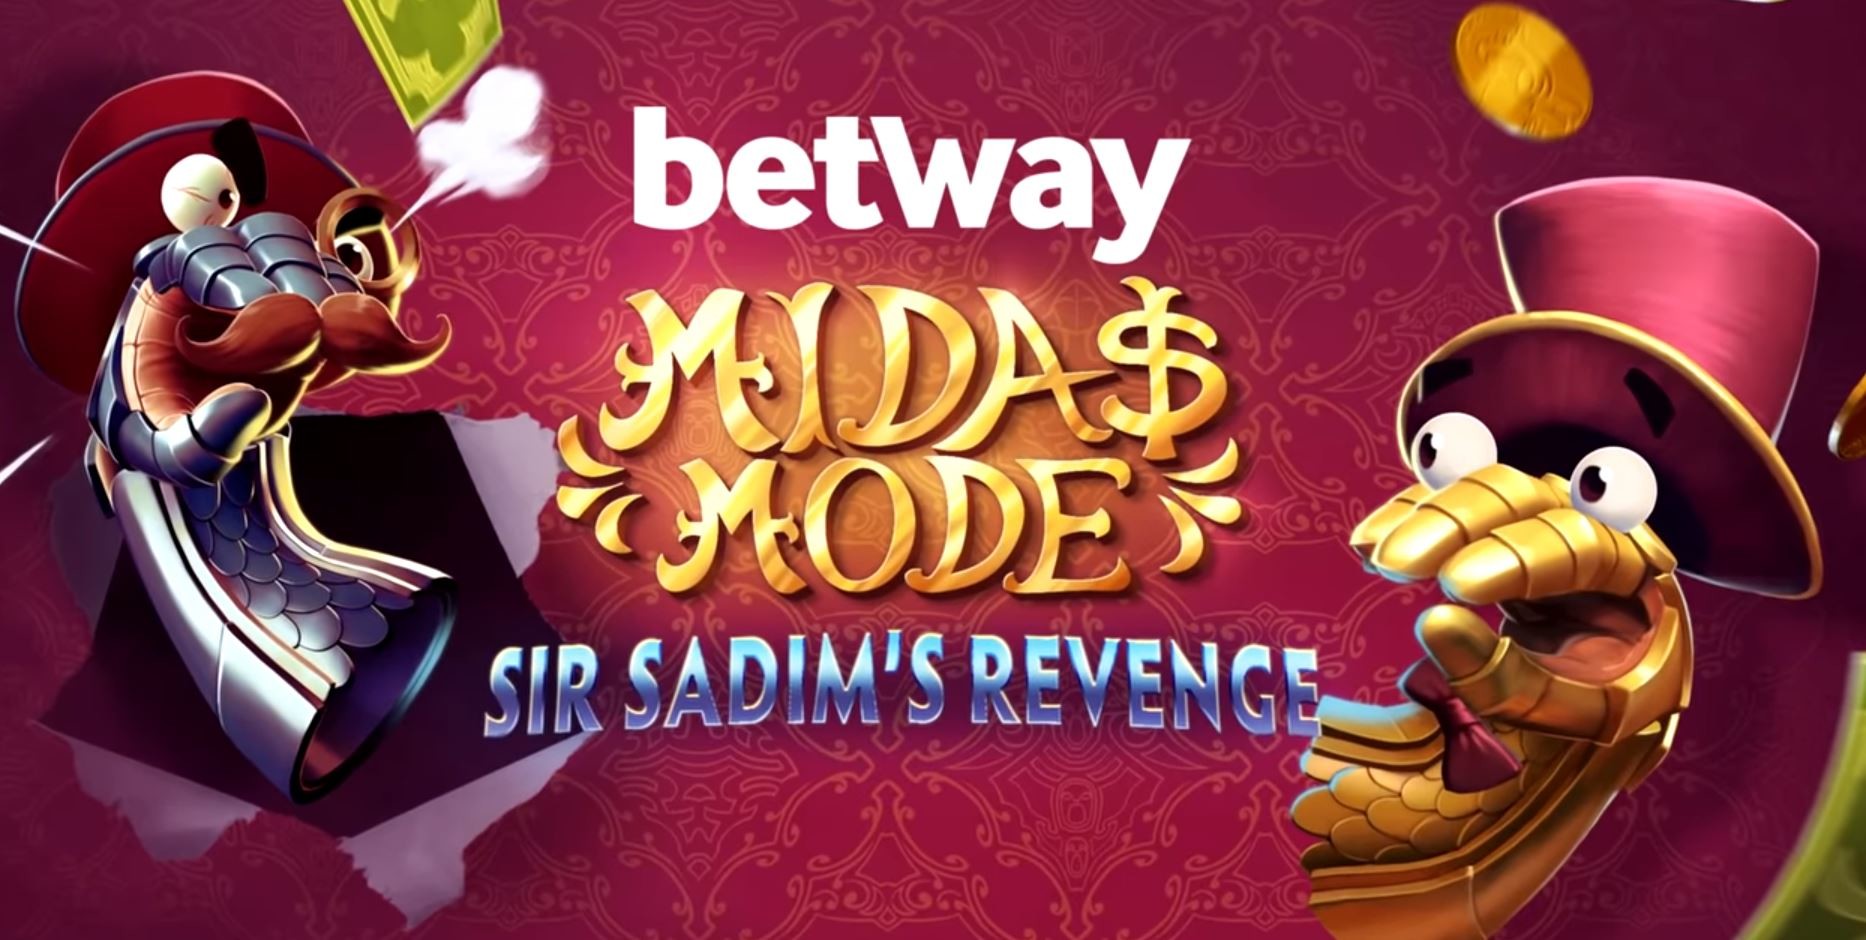 It's all about the money: The Midas Mode 2 Suvival Guide